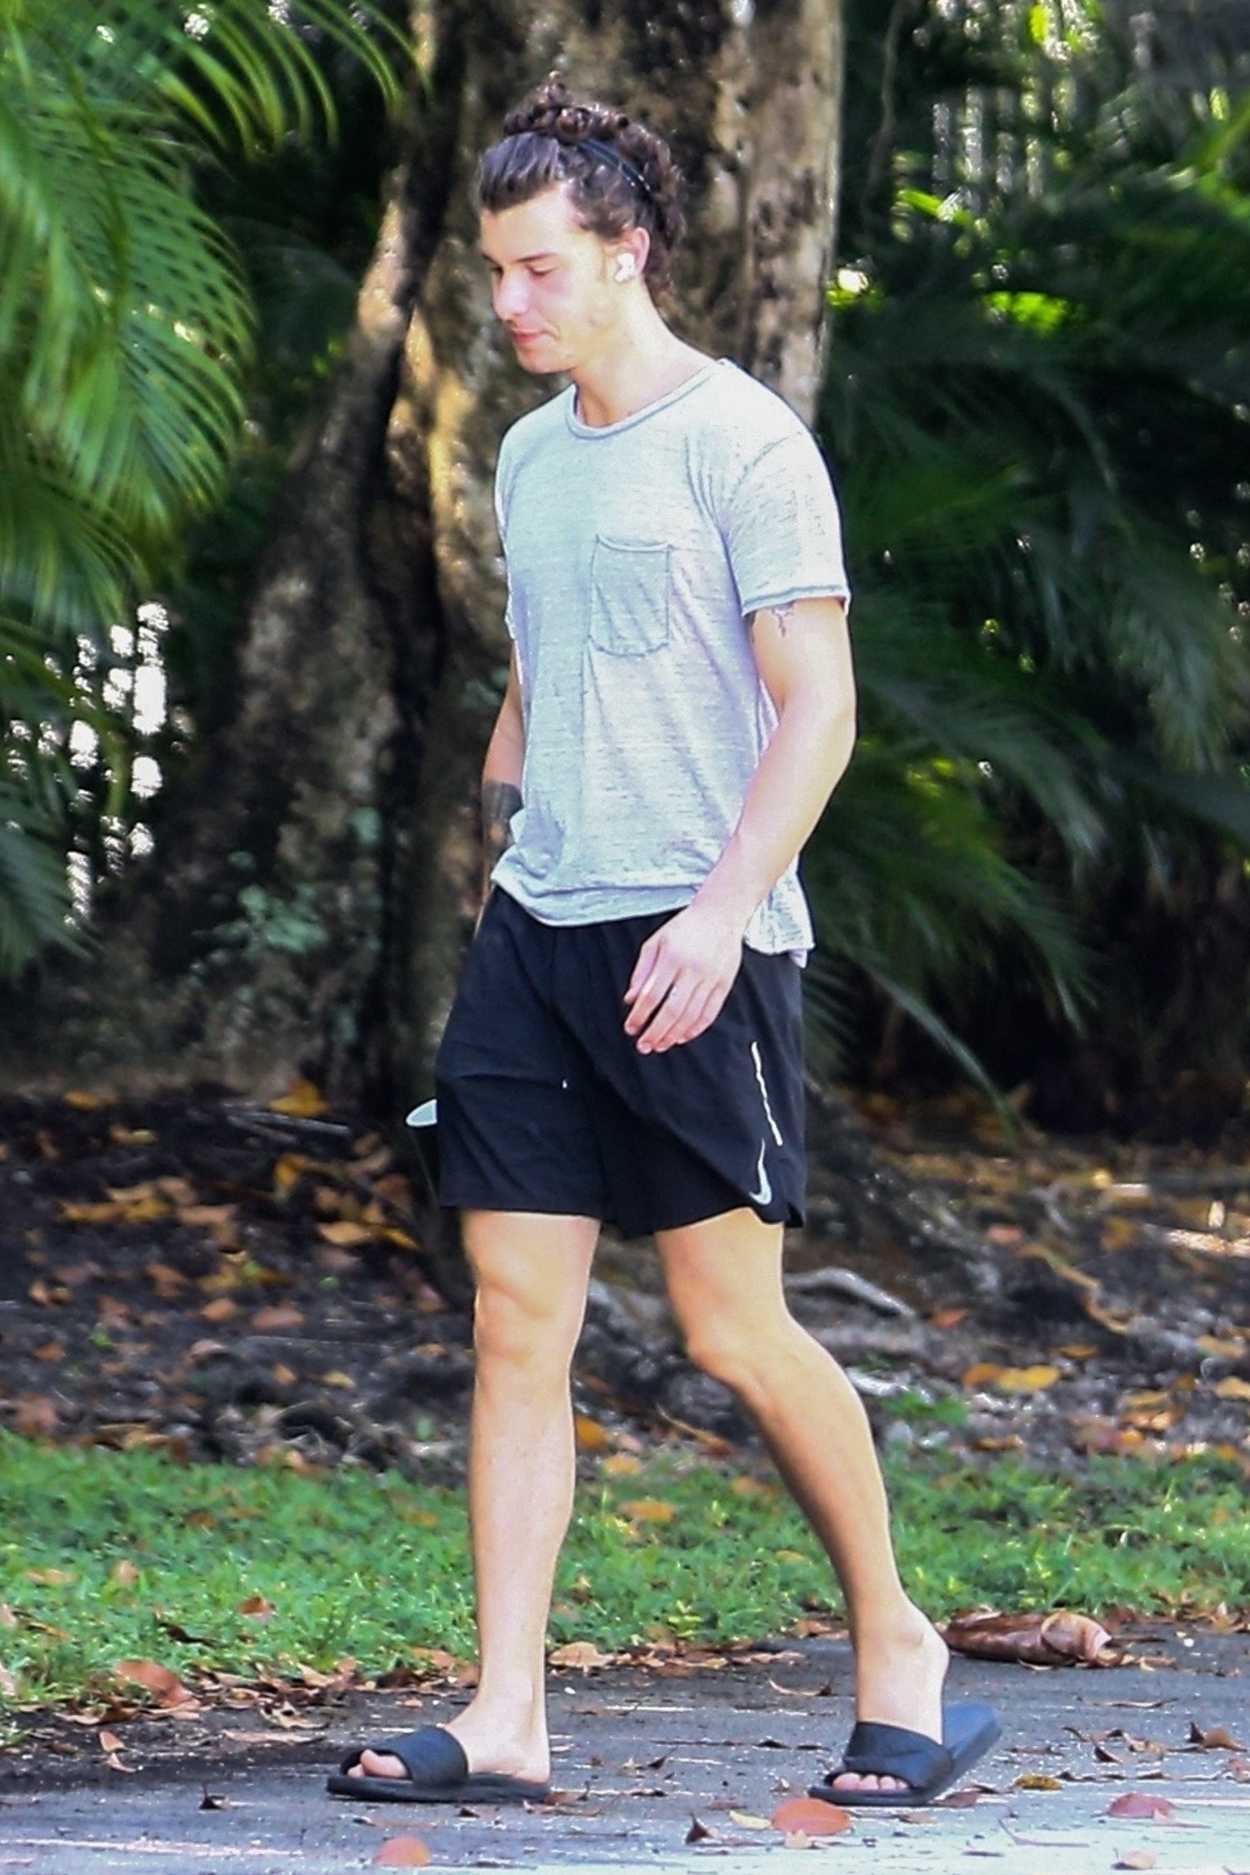 Shawn Mendes in a Gray Tee Enjoys a Solo Morning Walk in Mia